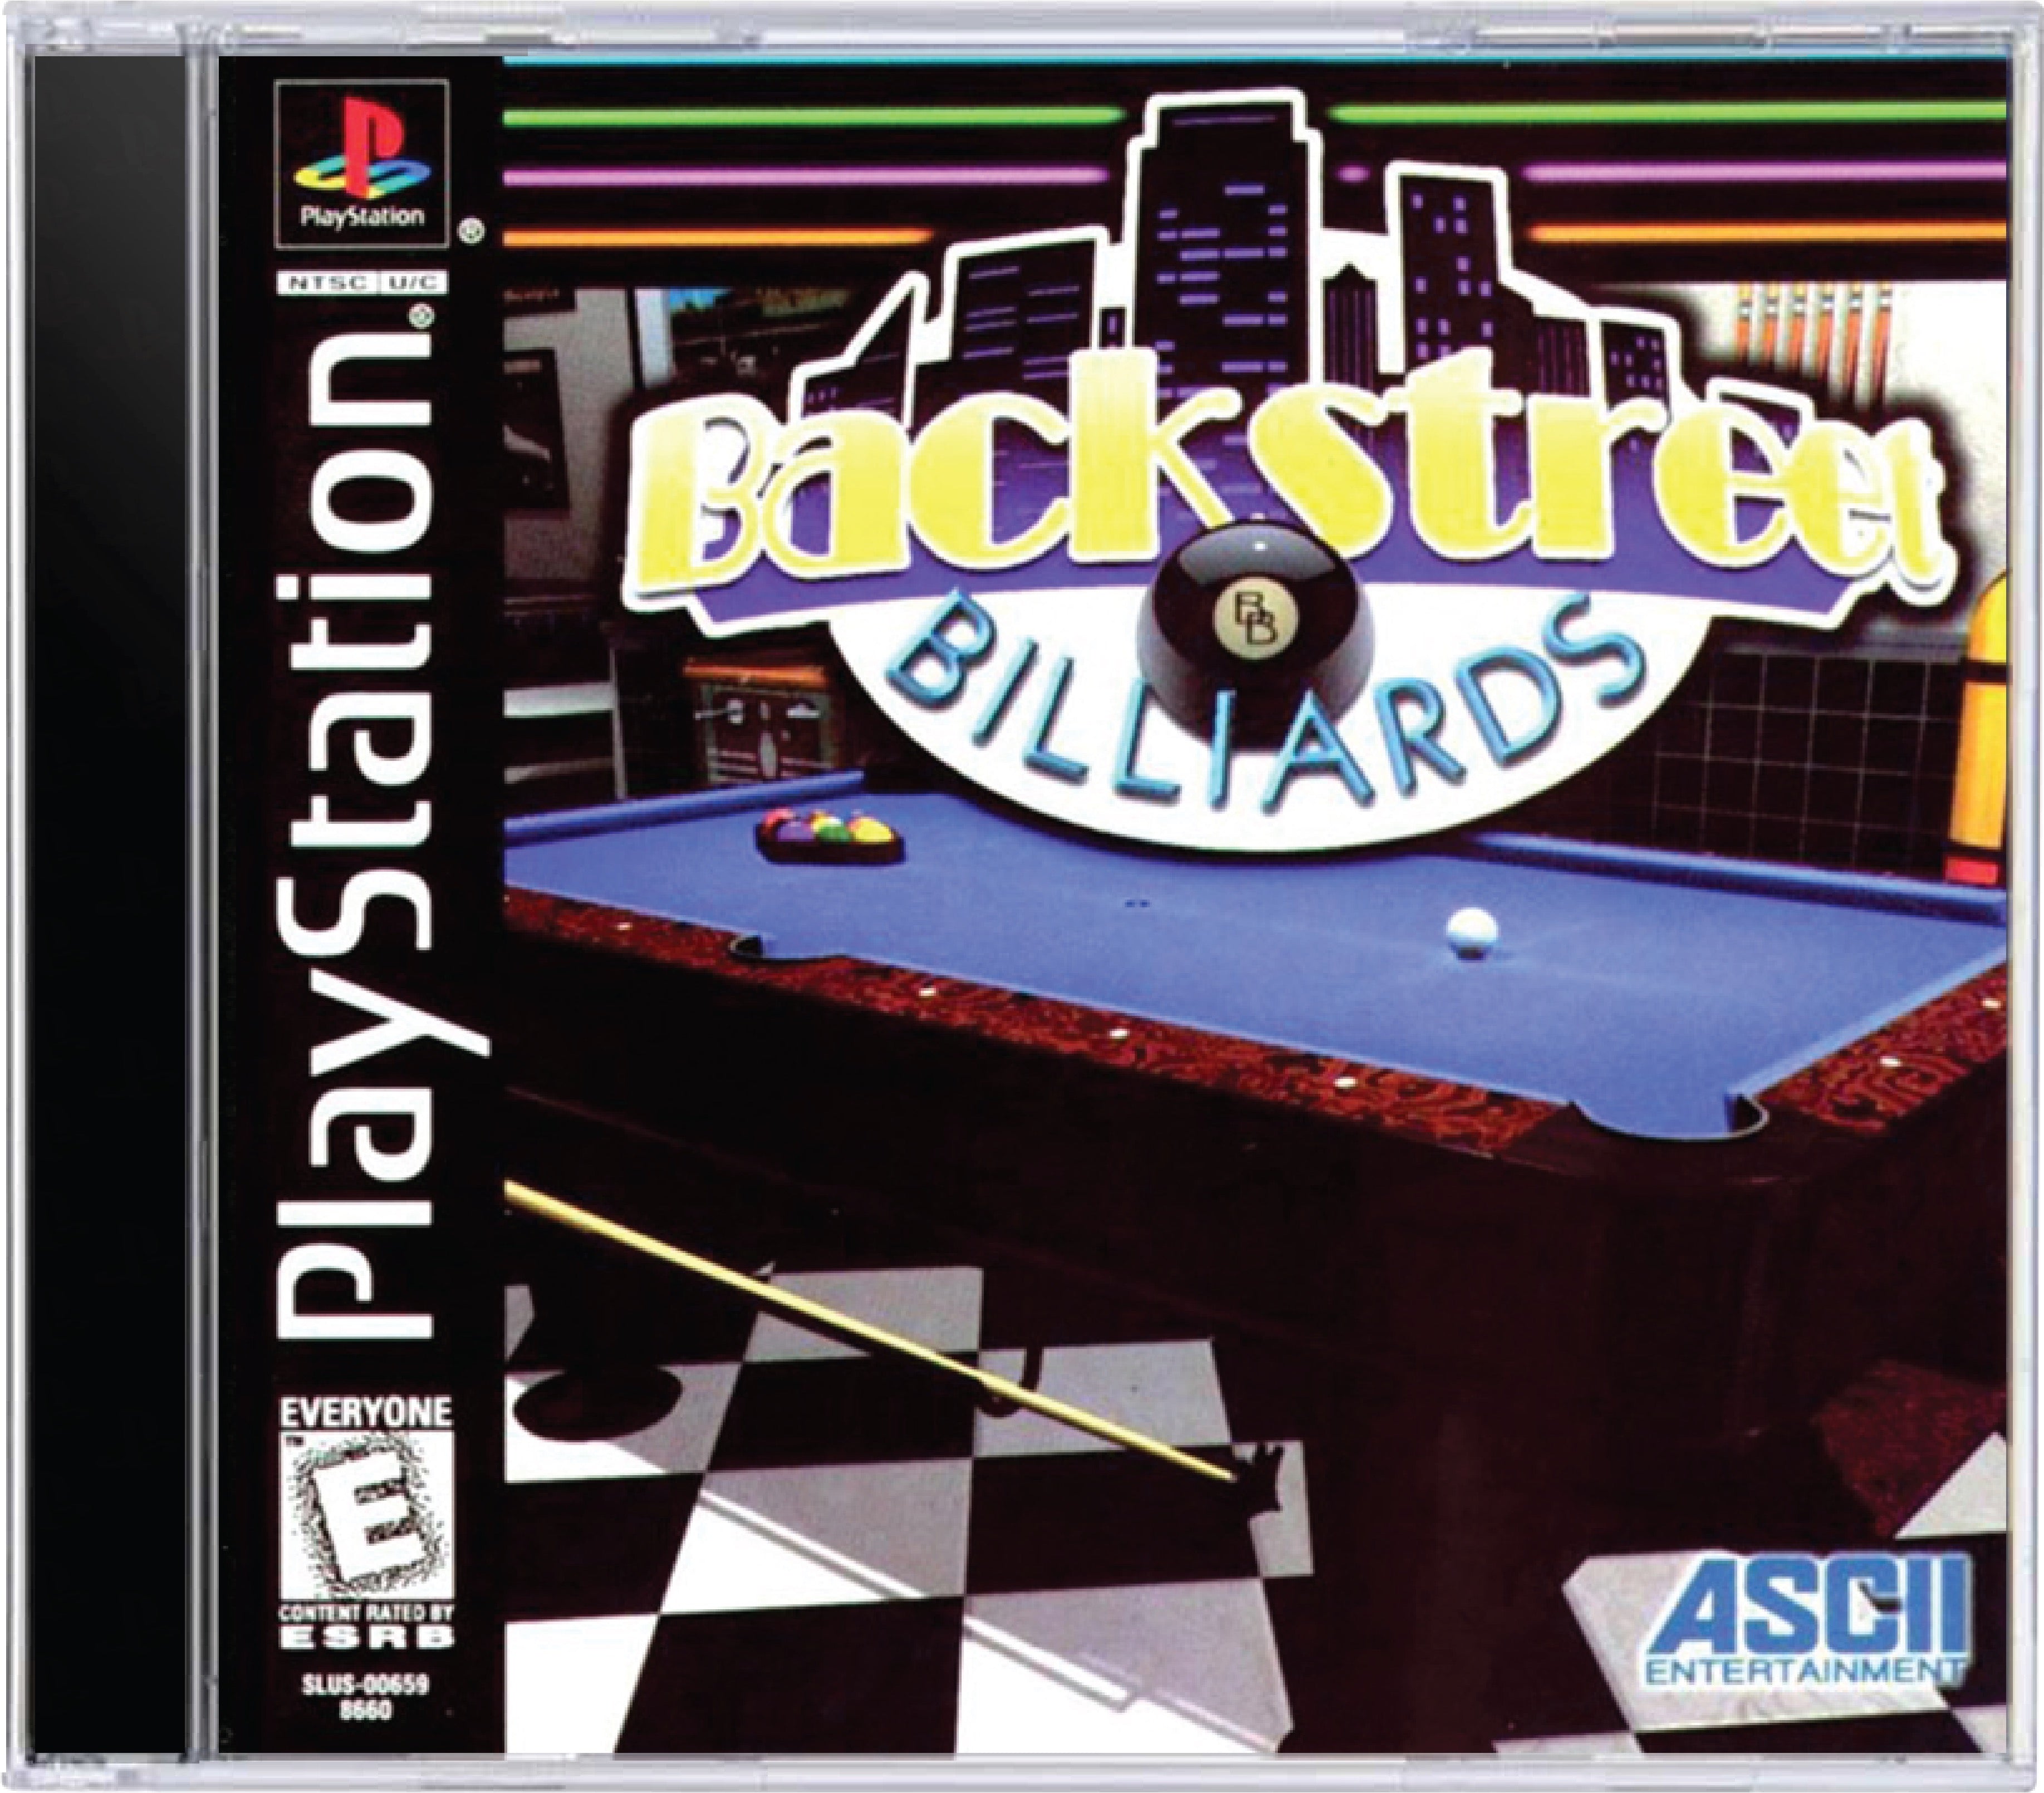 Backstreet Billiards Cover Art and Product Photo